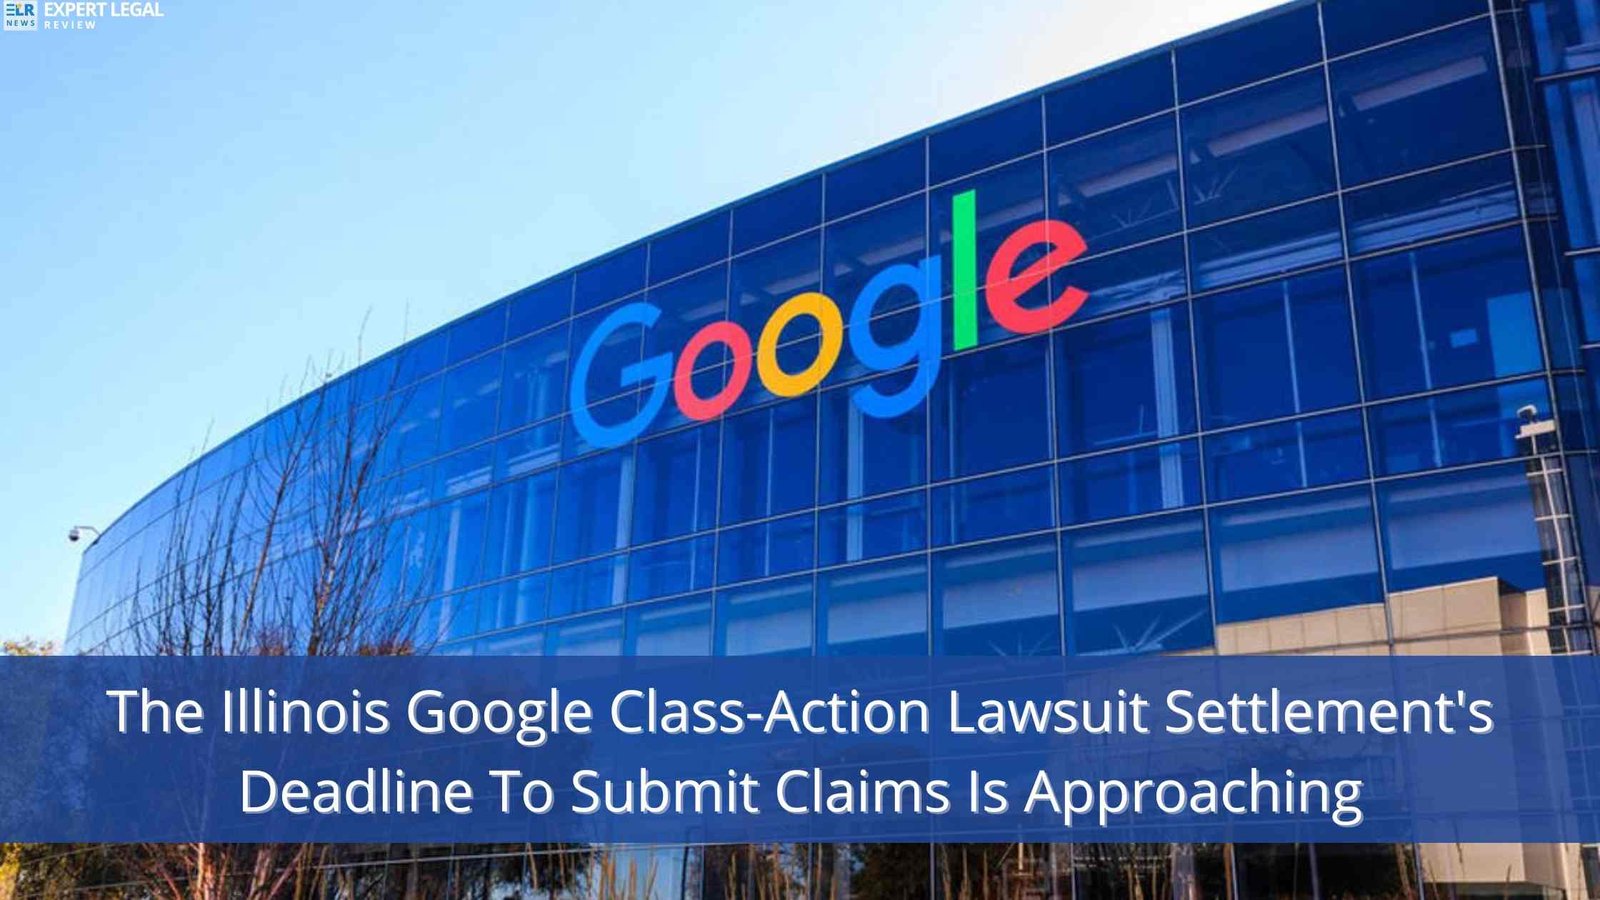 The Illinois Google Class-Action Lawsuit Settlement's Deadline To Submit Claims Is Approaching